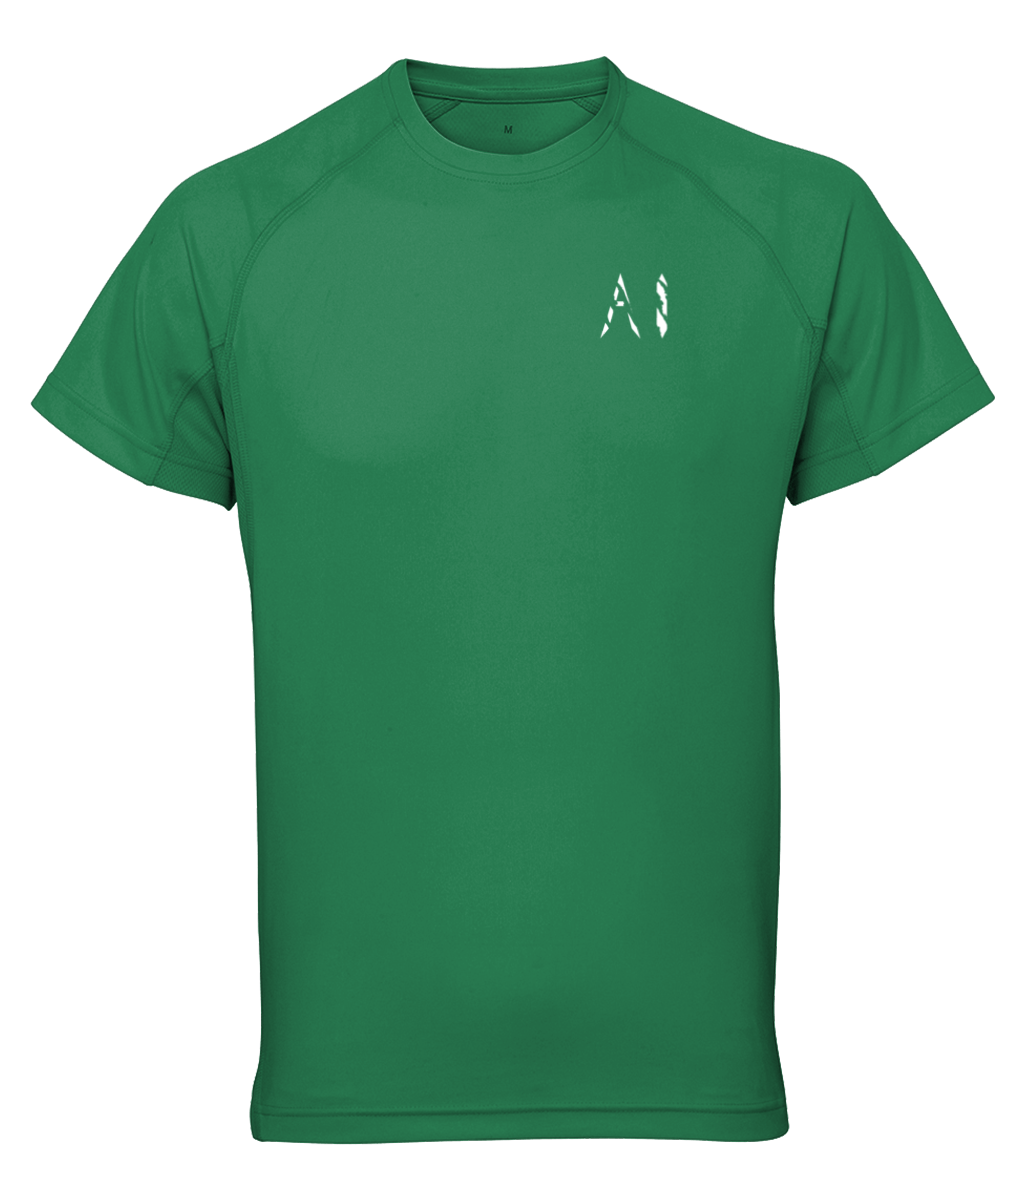 Mens light green Athletic Performance Top with White AI logo on the left chest